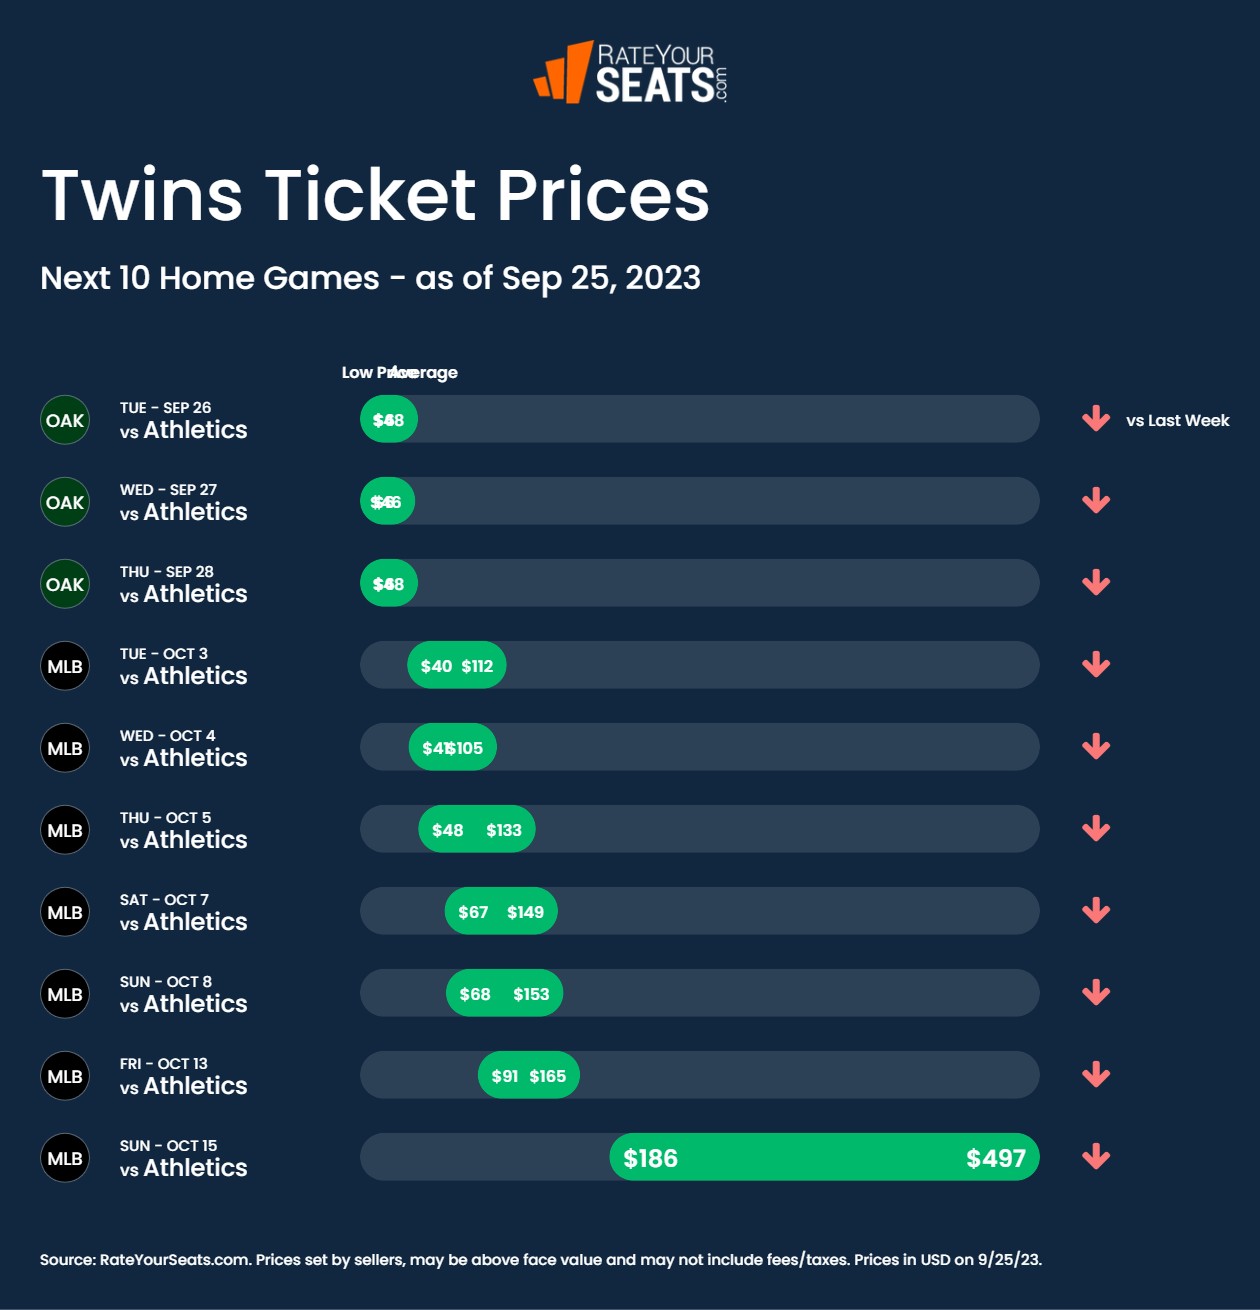 Twins tickets pricing week of September 25 2023